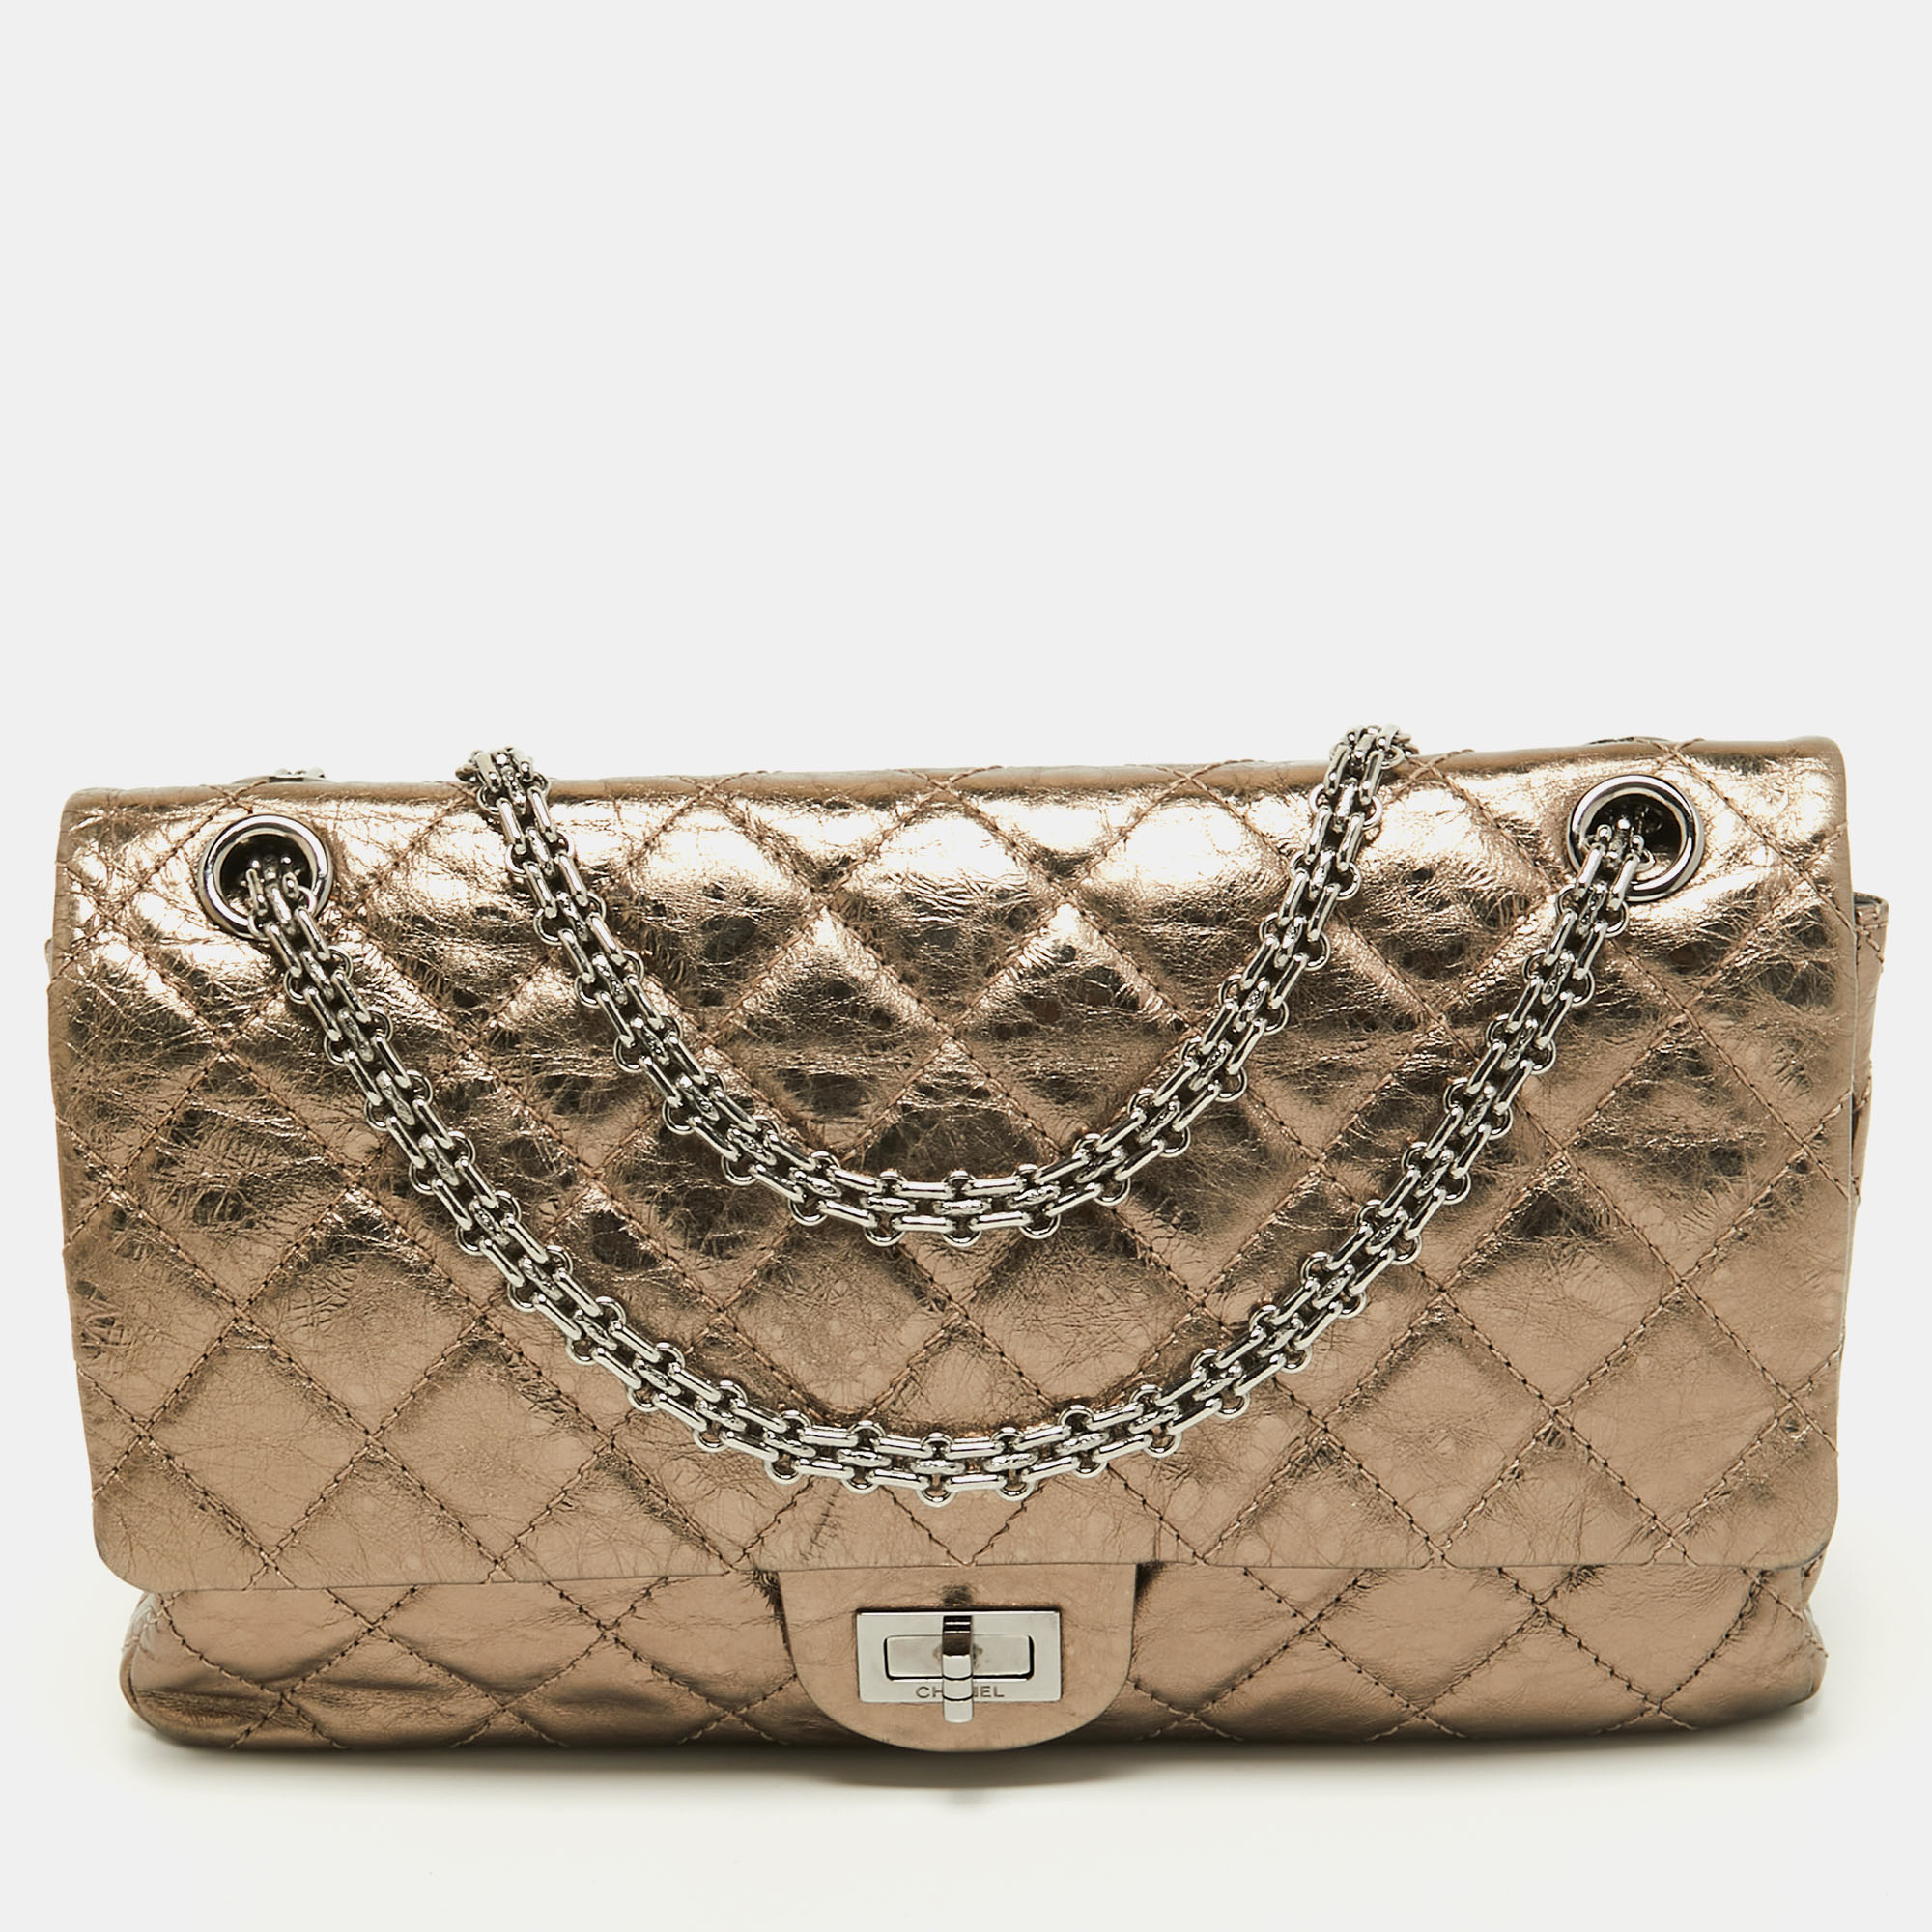 A METALLIC CHAMPAGNE AGED LAMBSKIN LEATHER 2.55 REISSUE 226 DOUBLE FLAP  WITH SILVER HARDWARE, CHANEL, 2006